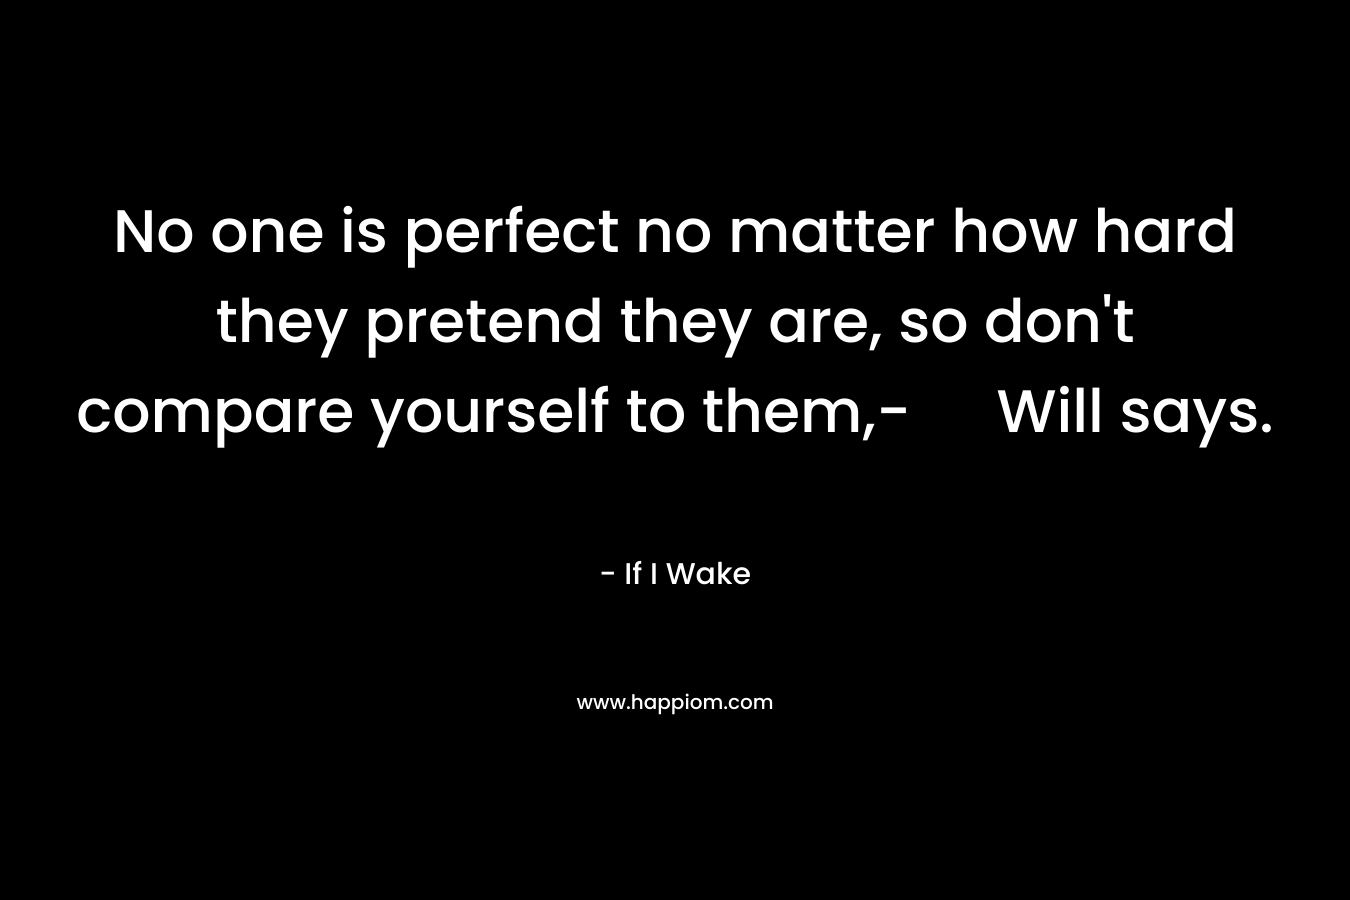 No one is perfect no matter how hard they pretend they are, so don’t compare yourself to them,- Will says. – If I Wake